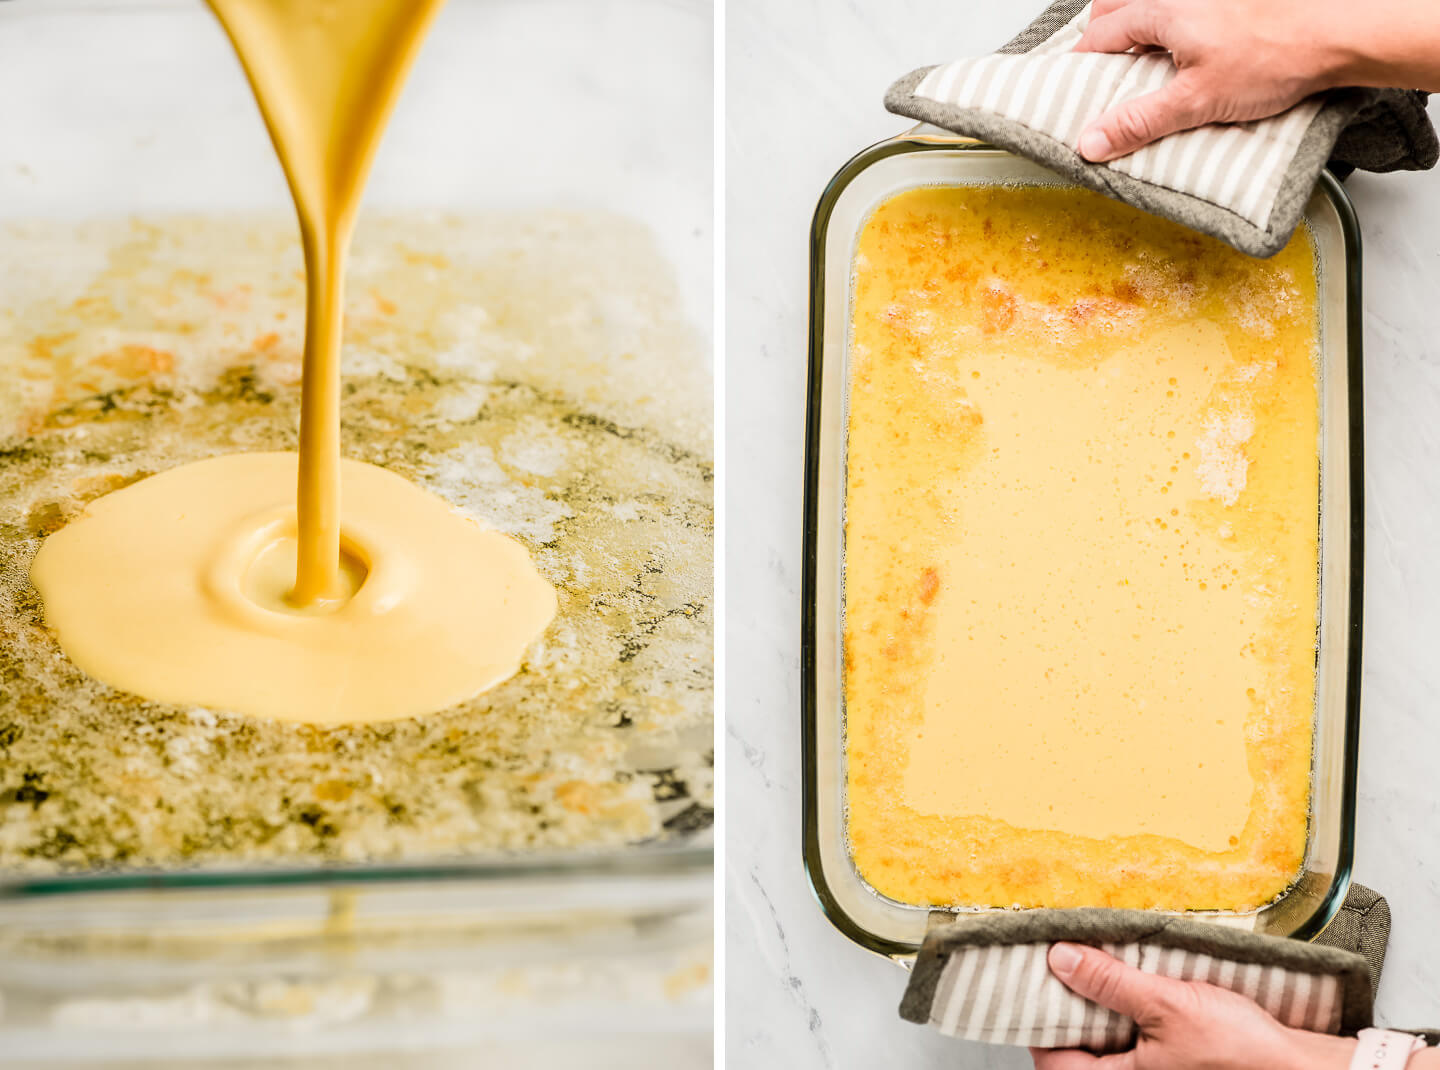 Batter streaming into a pan of melted butter; hands with hot pads holding a glass pan that has batter and melted butter in a glass baking dish.